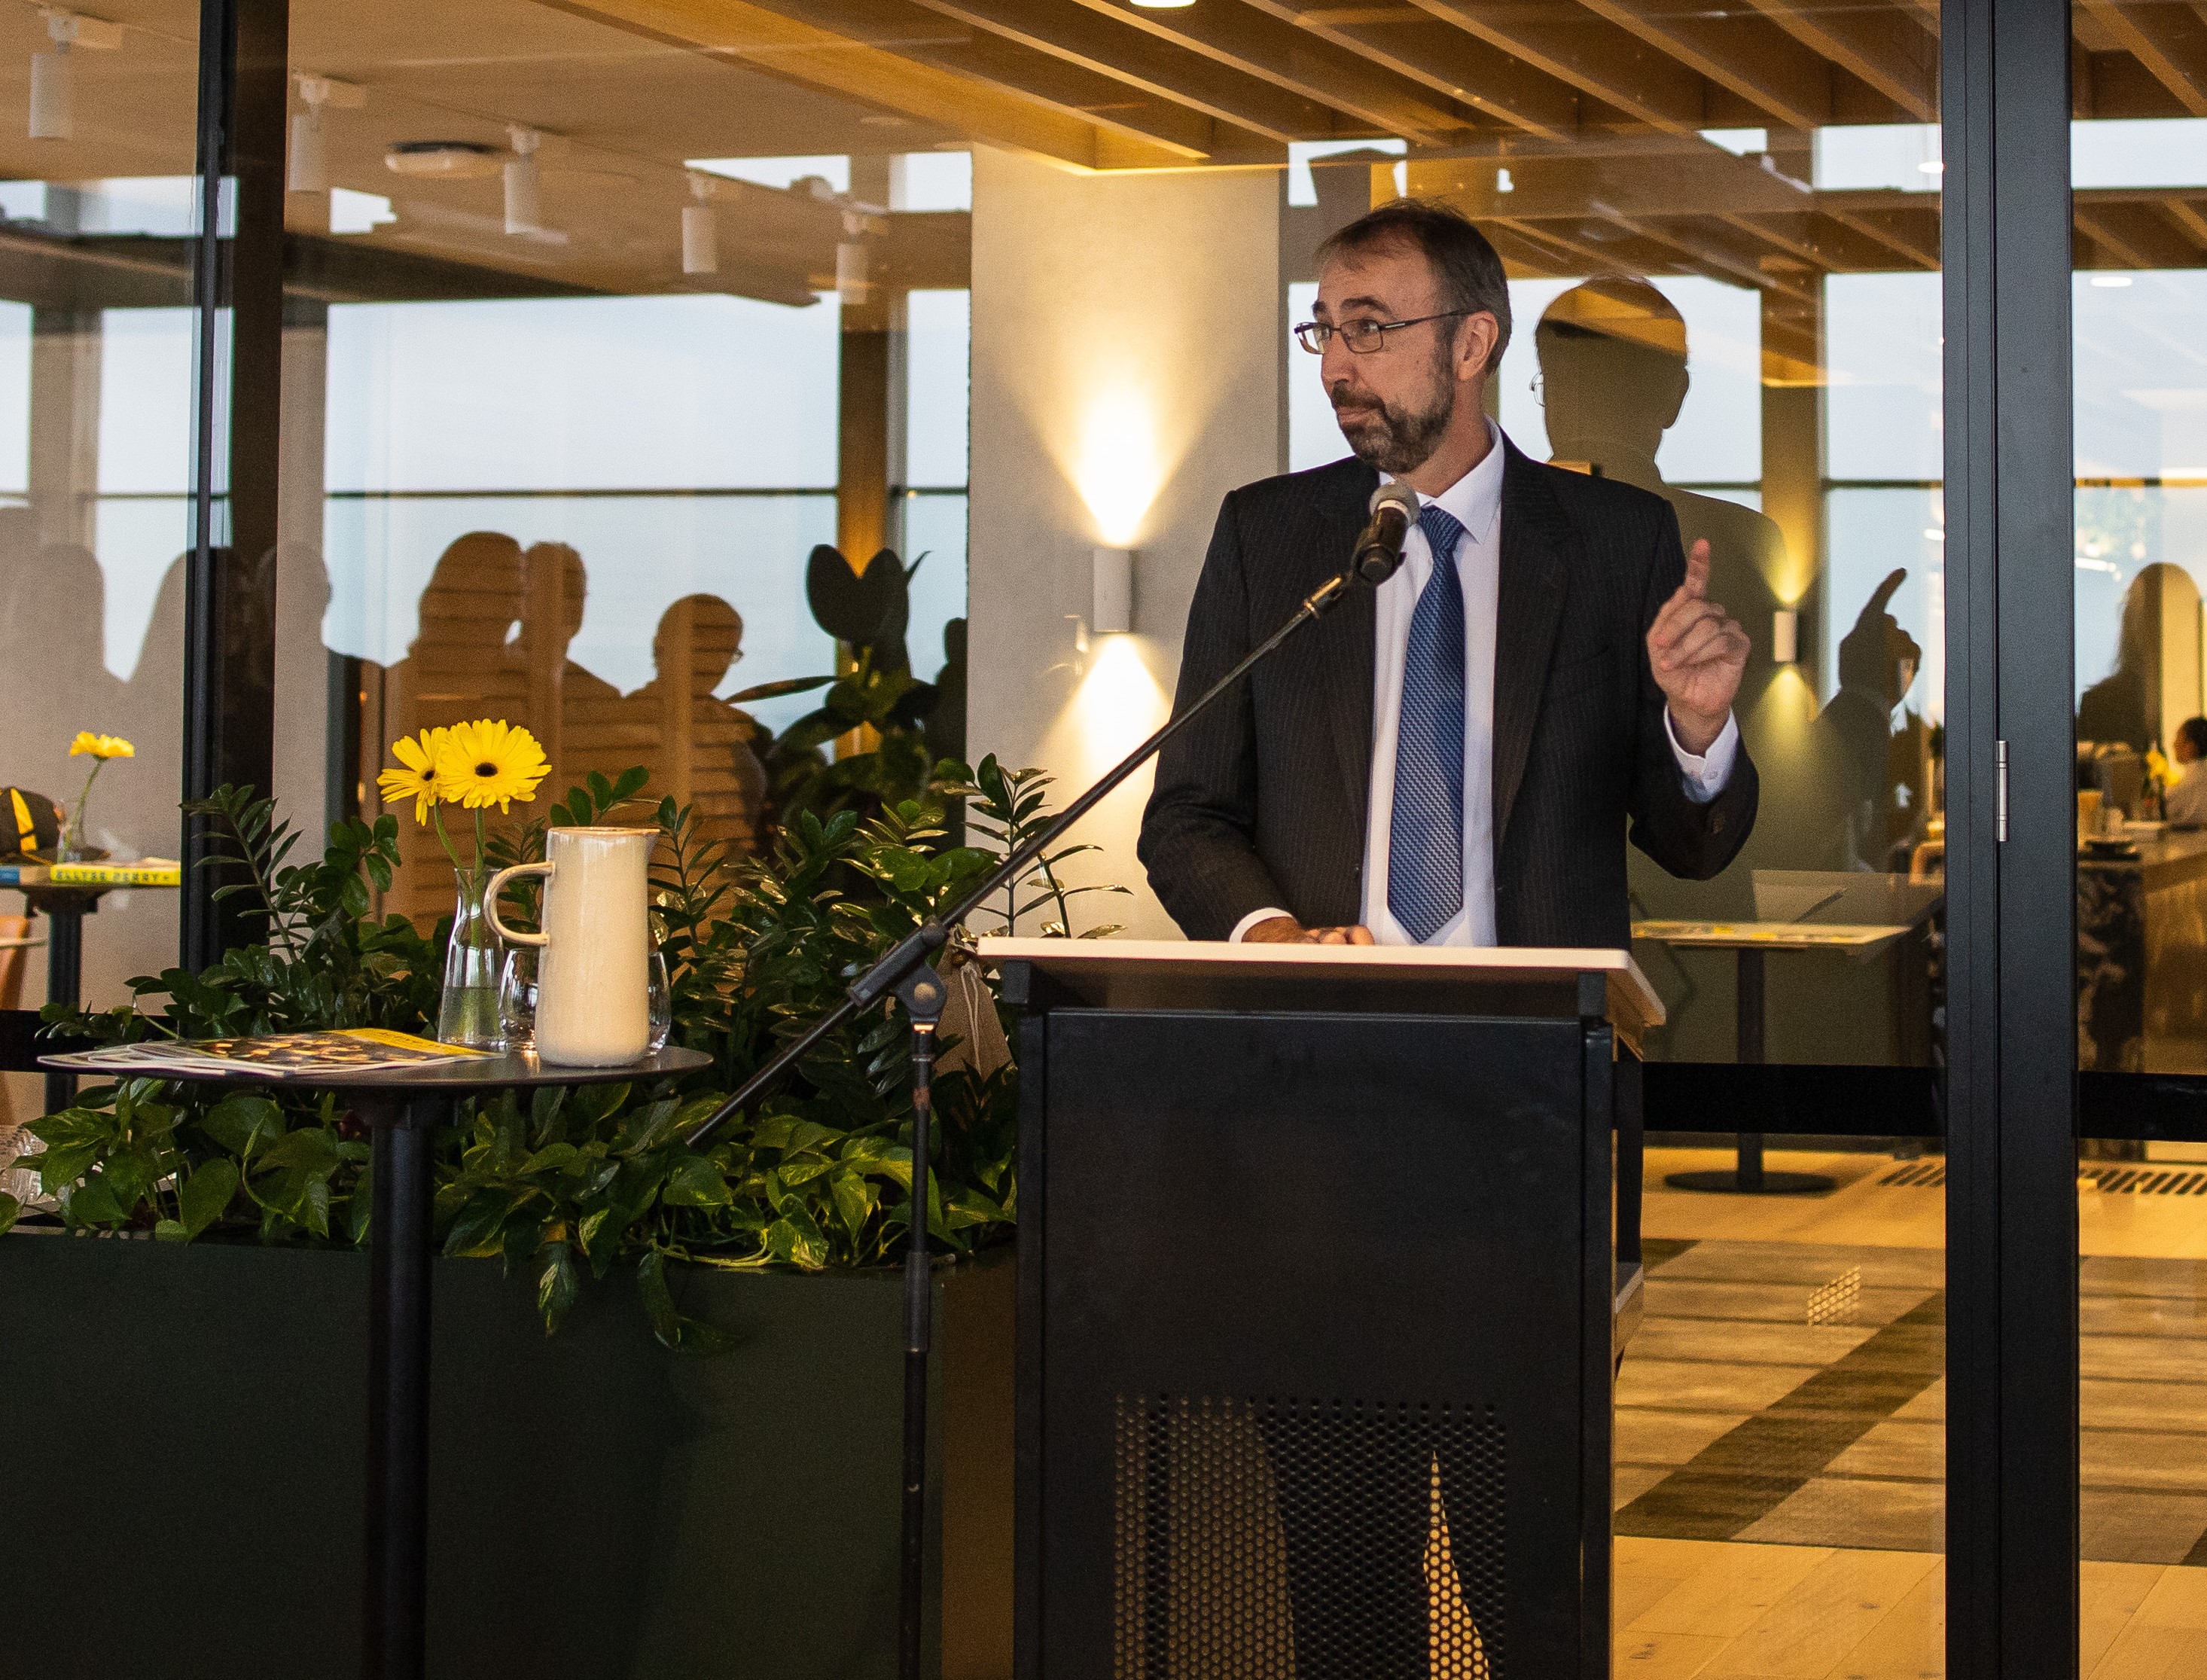 UNSW's Deputy Vice-Chancellor Academic Merlin Crossley welcomed guests at the launch